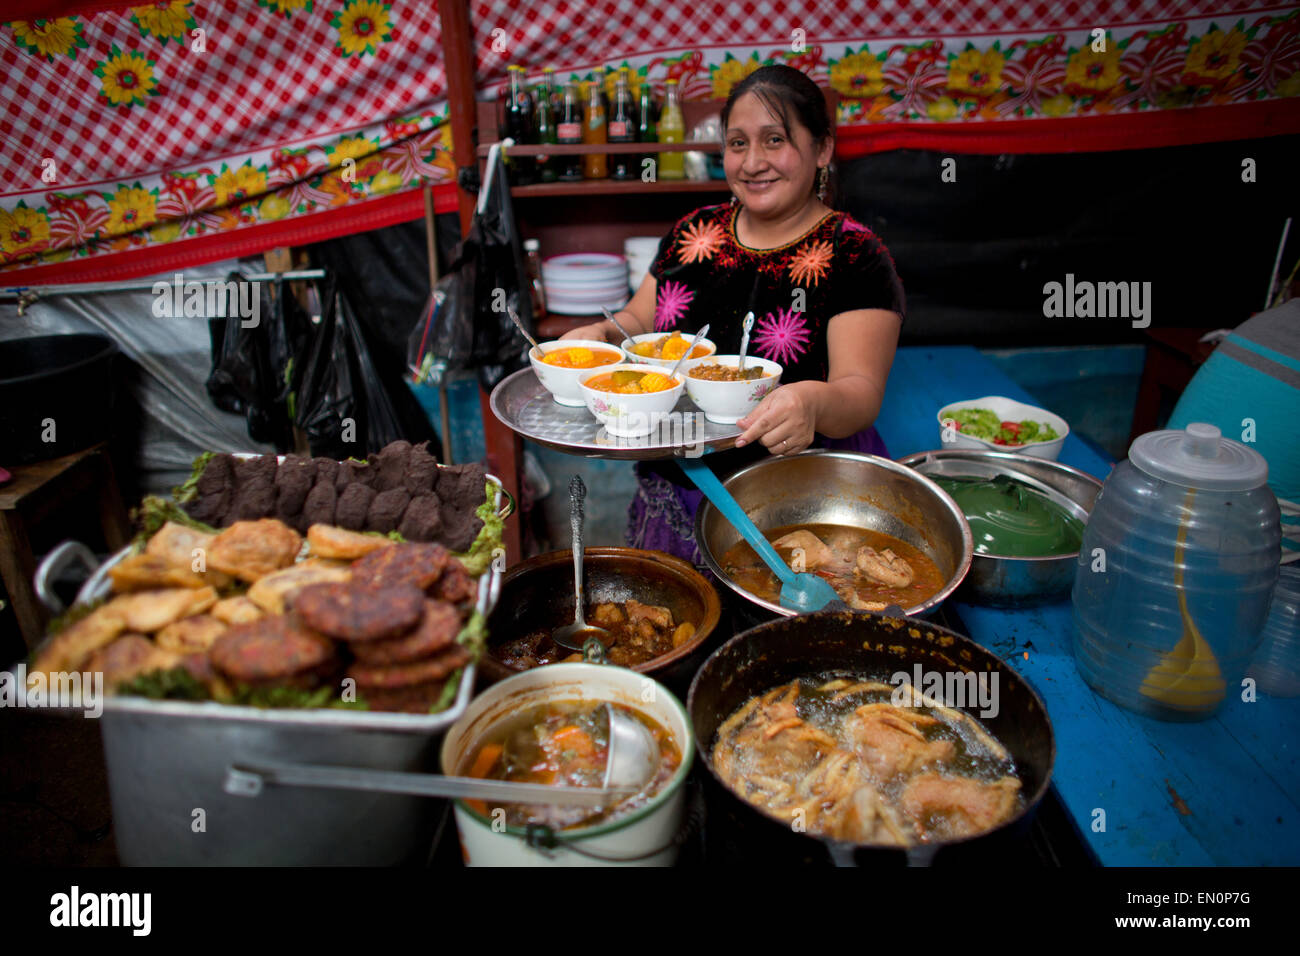 cook at work in Guatemala city market Stock Photo